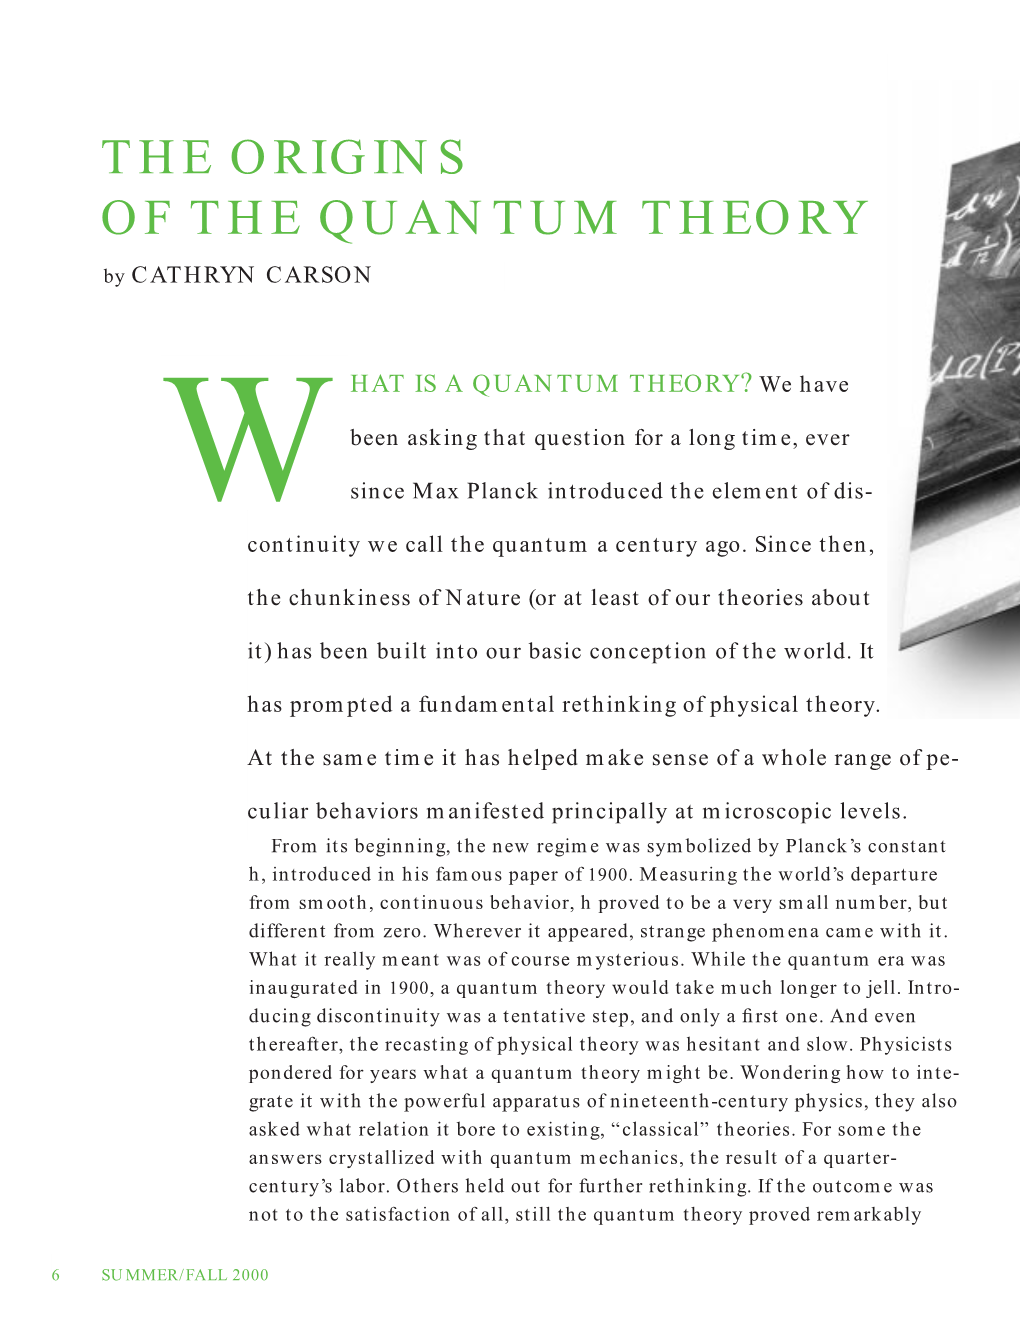 The Origins of the Quantum Theory